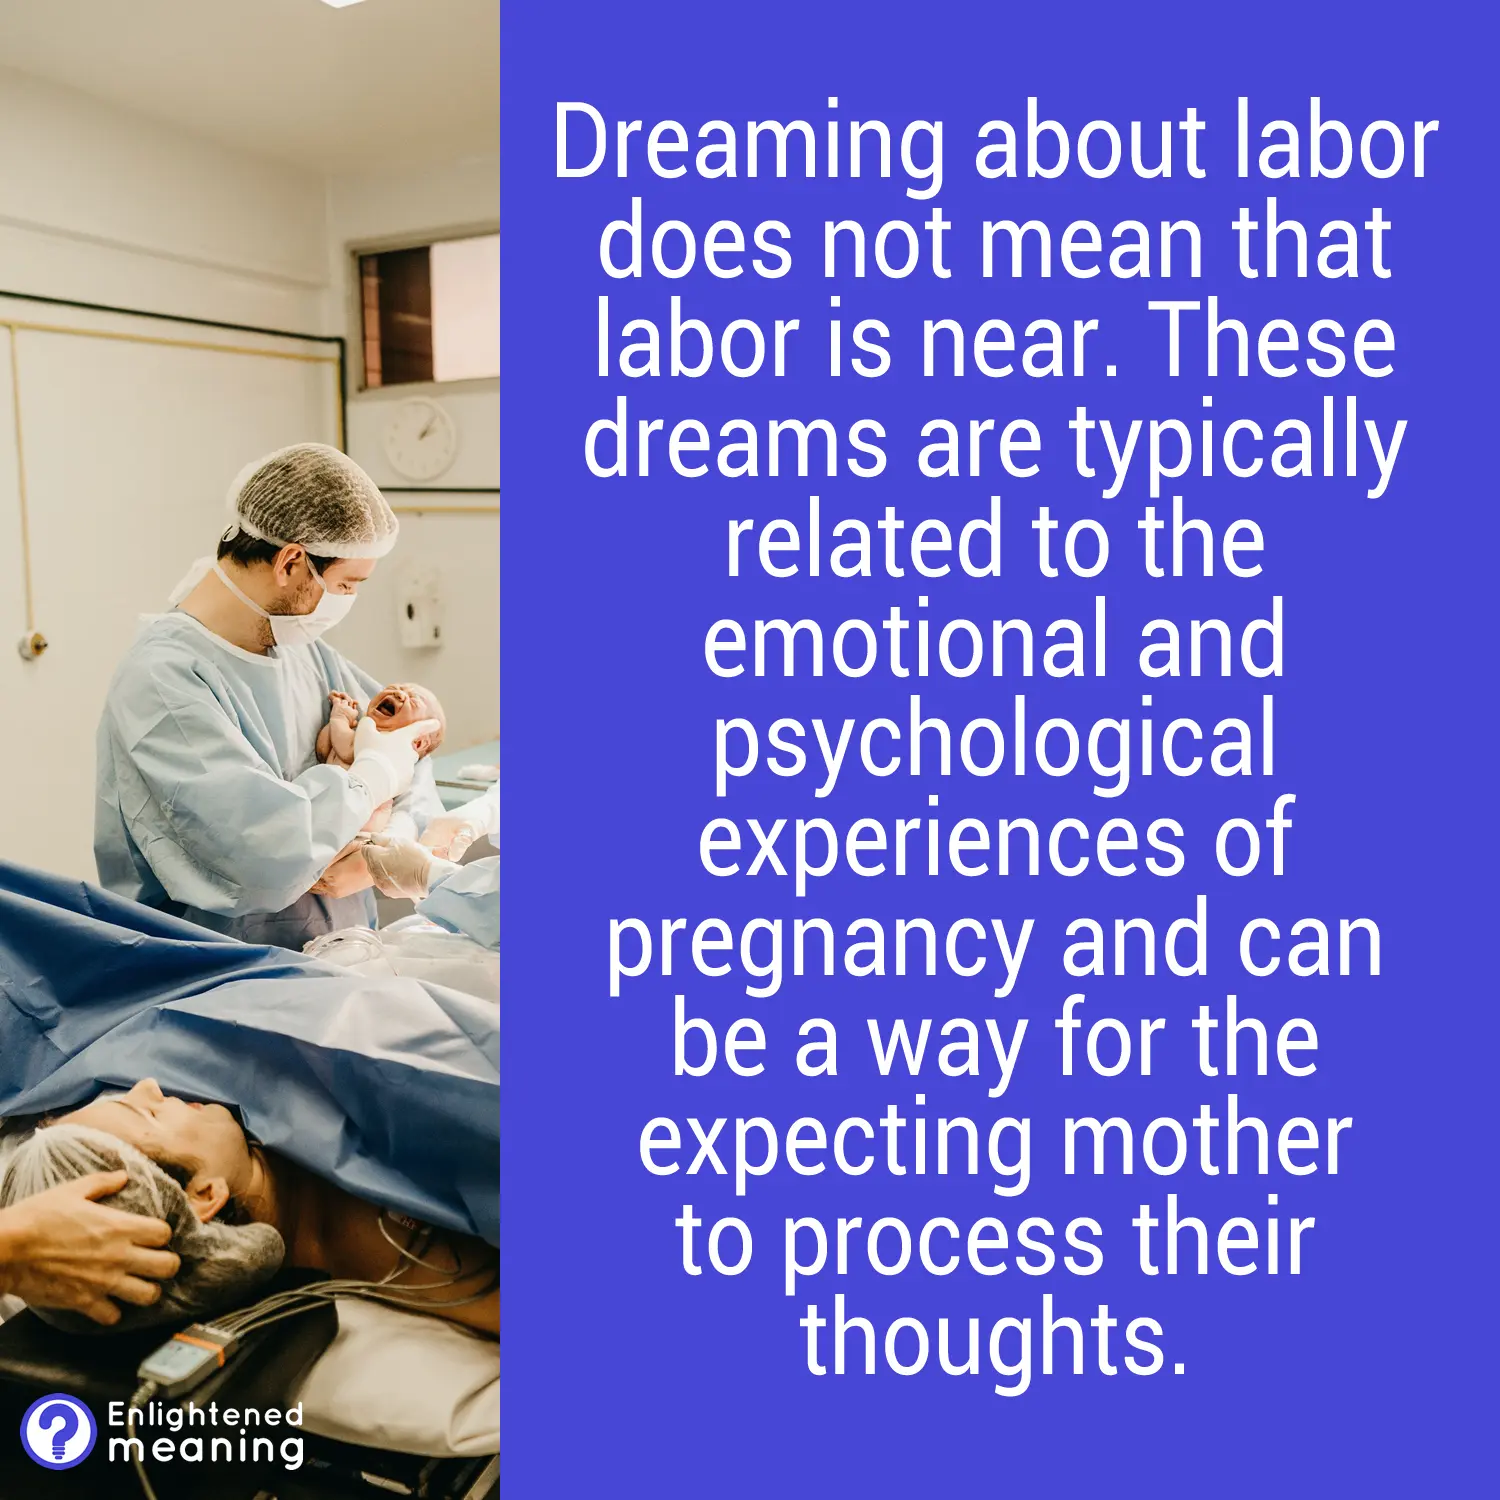 Does dreaming about labor mean labor is near